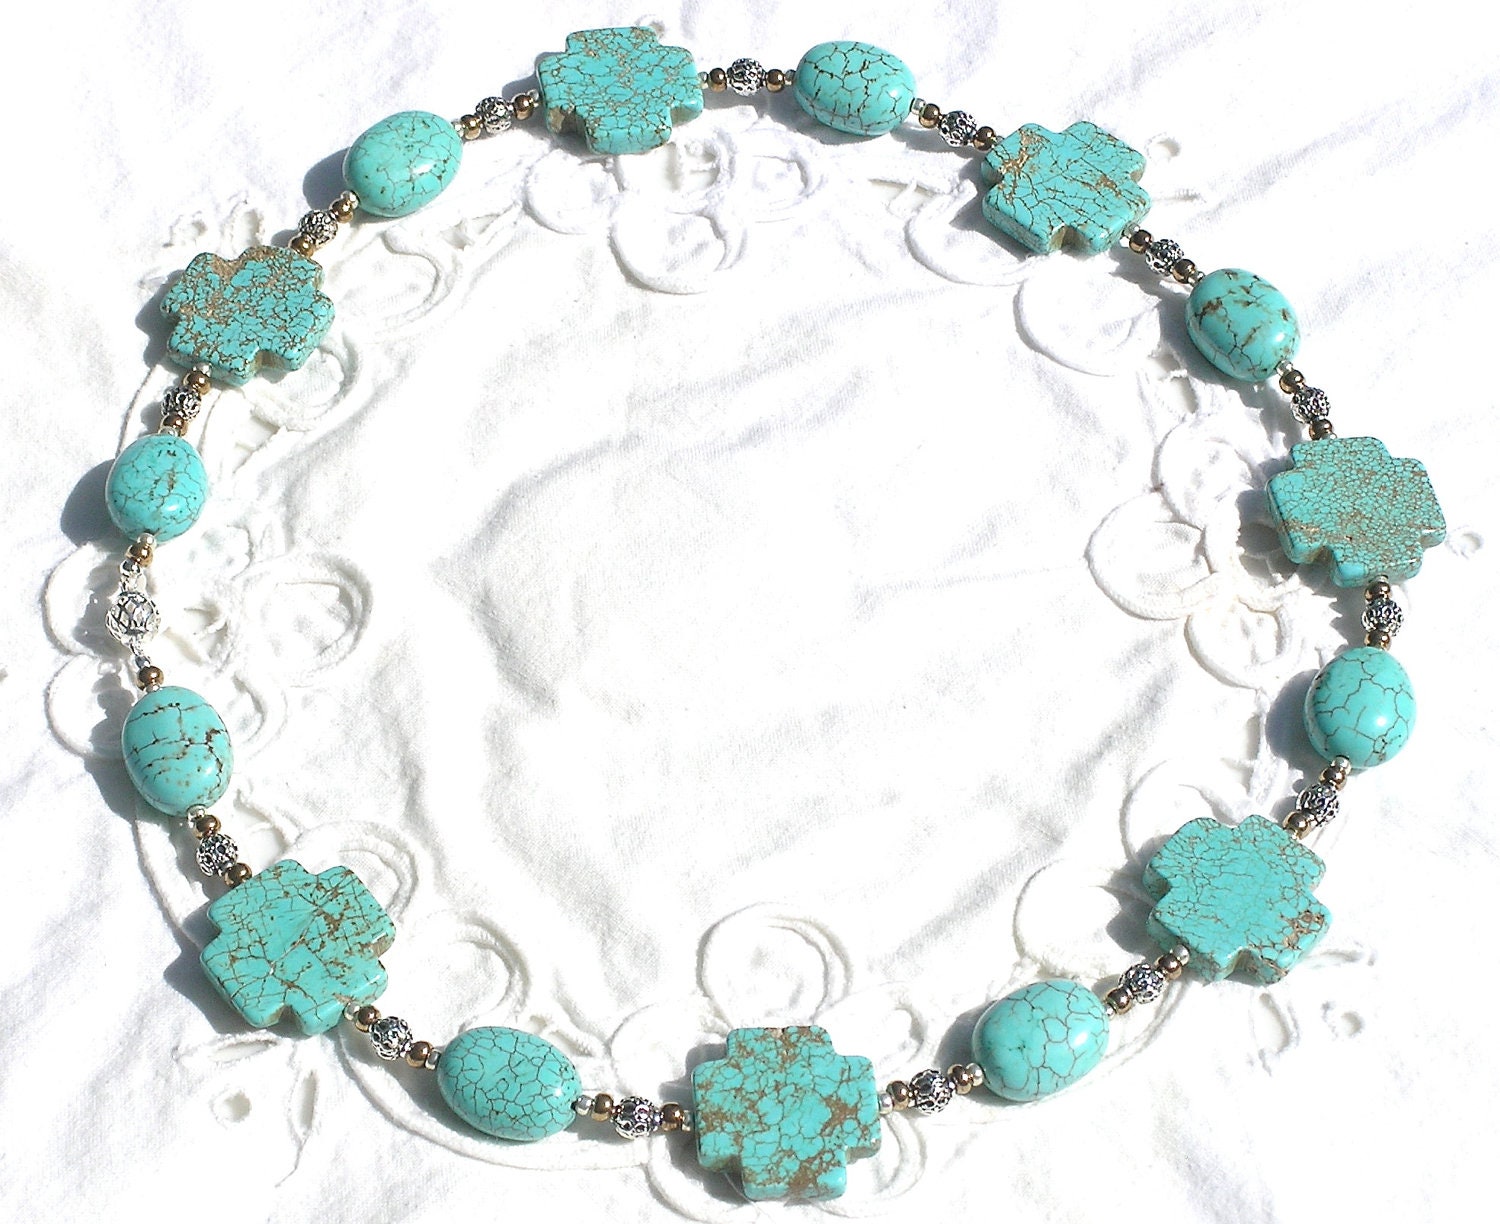 Statement Necklace Turquoise Cross, Oval & Bronze w/Antique Filigree Silver - Free Earrings .-. Mind4Design